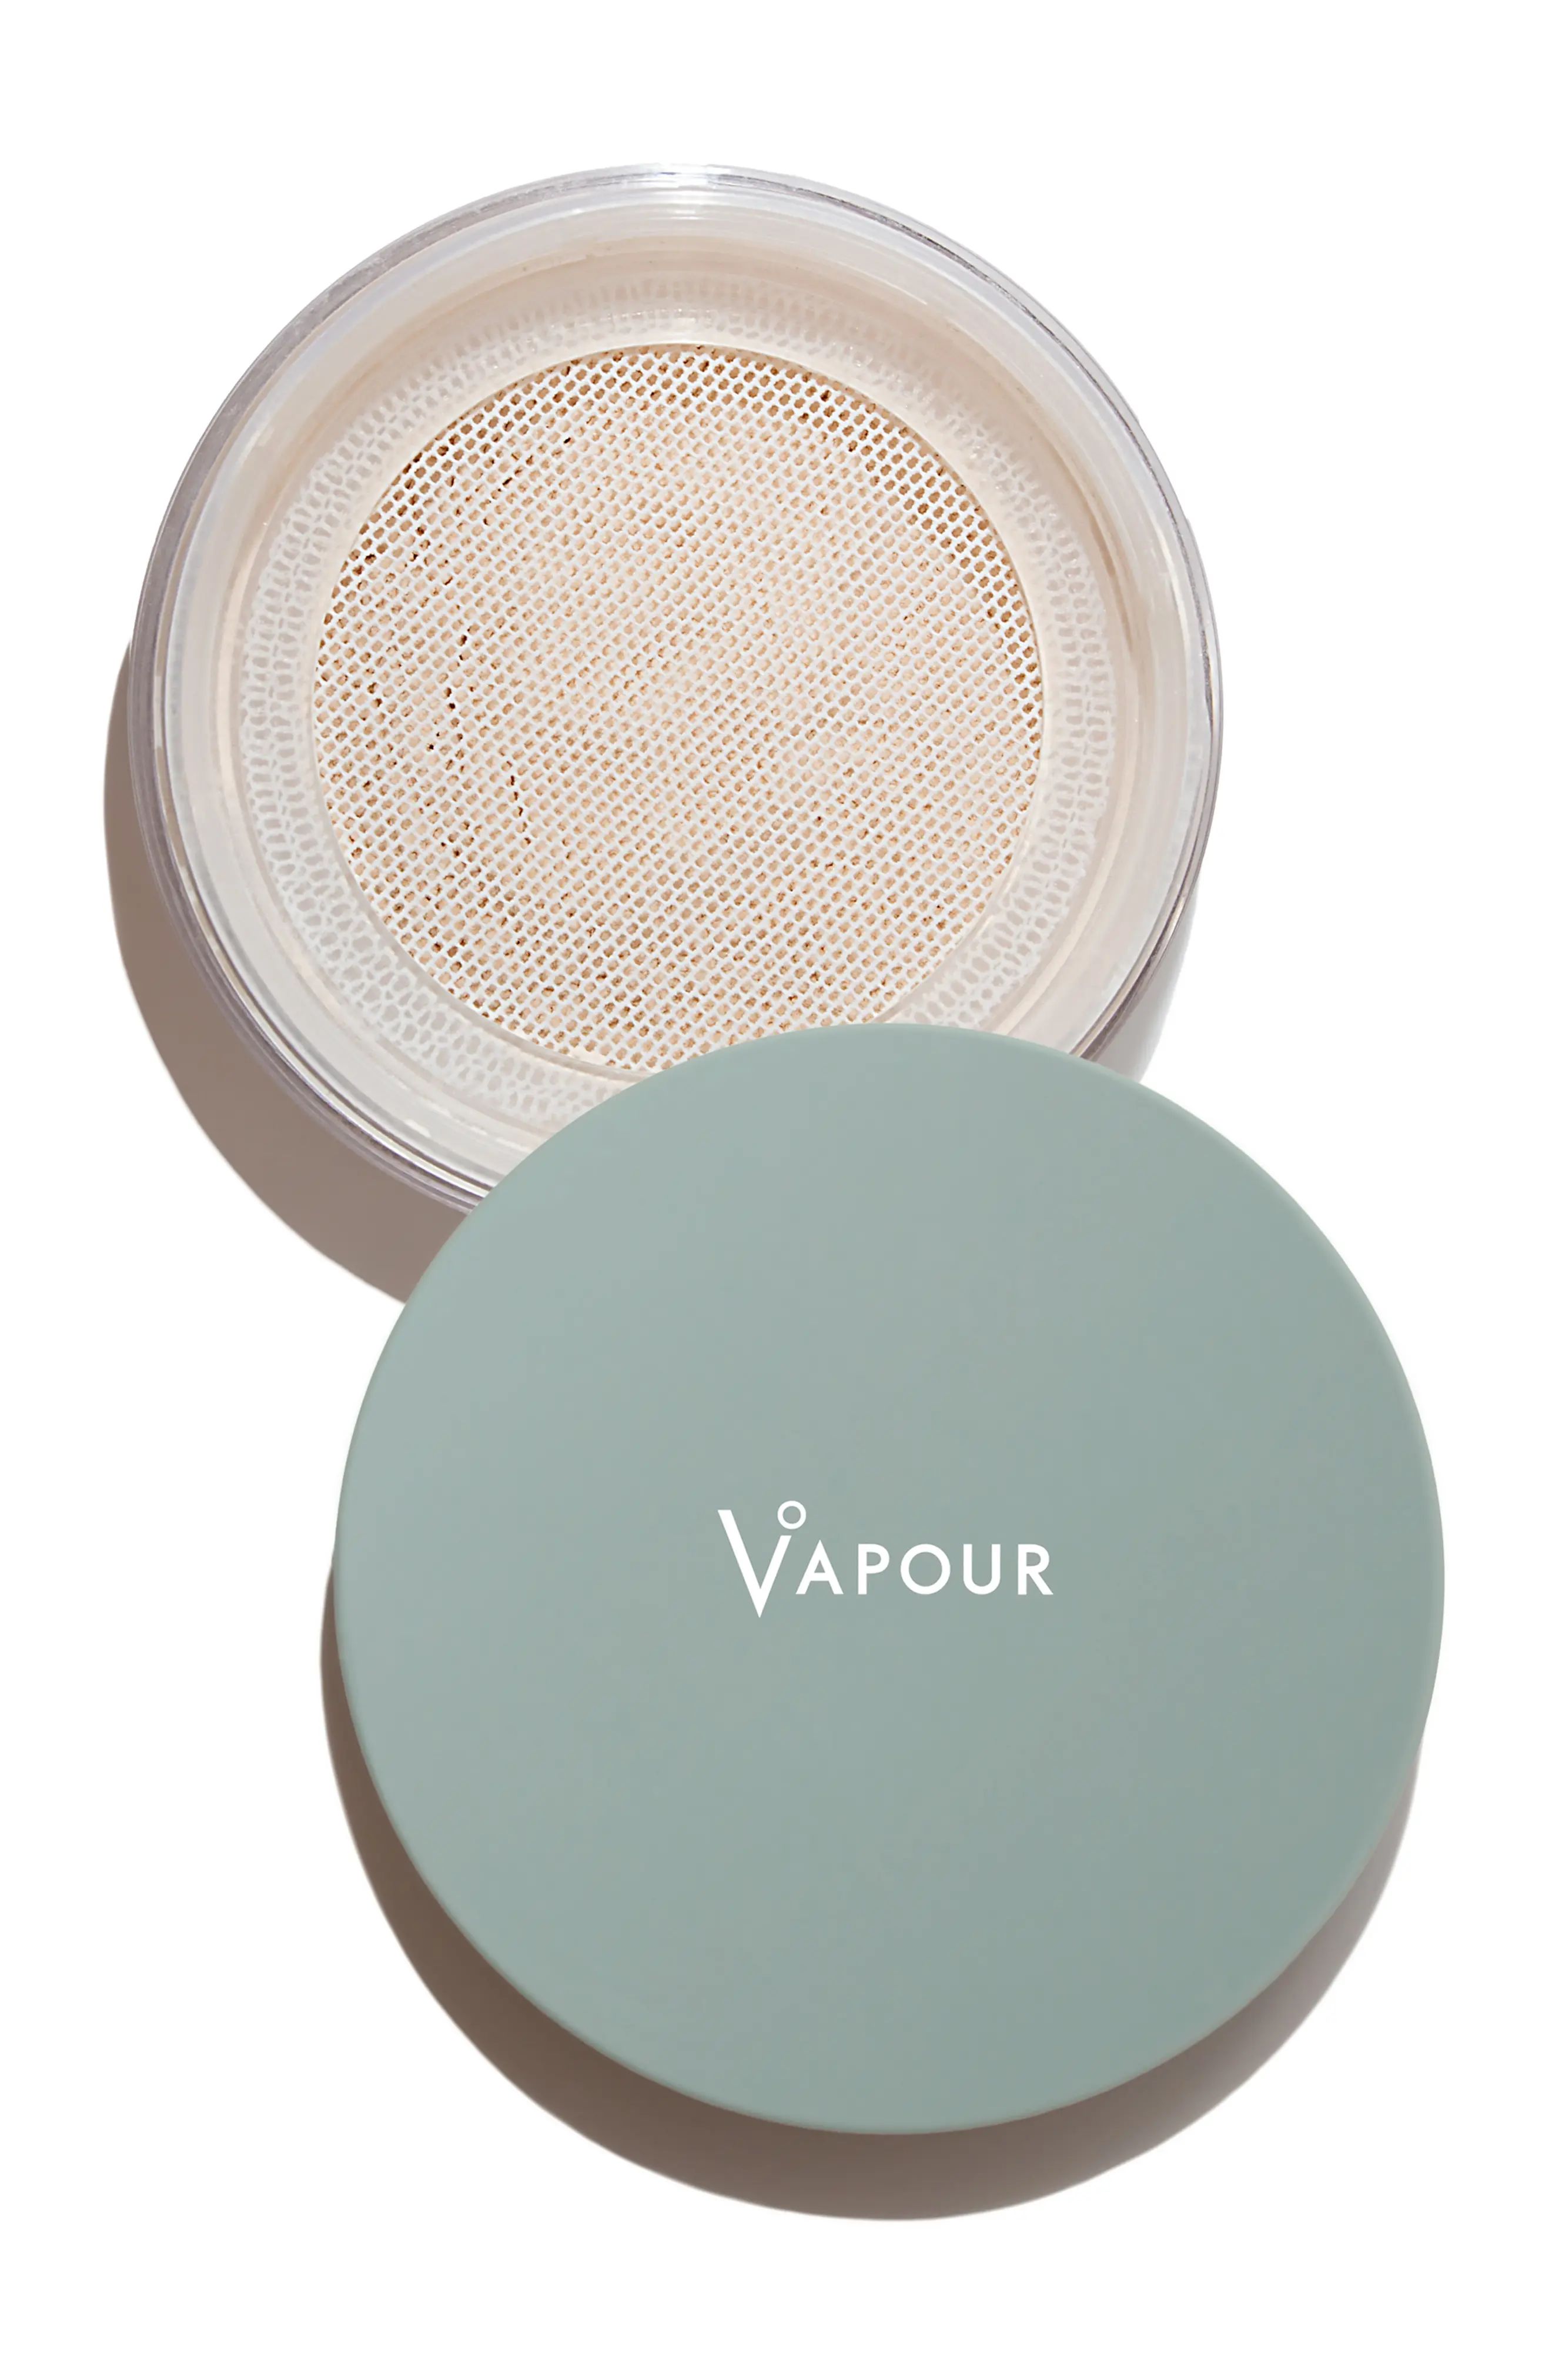 Vapour Perfecting Powder Loose Finishing Powder - No Color | Nordstrom